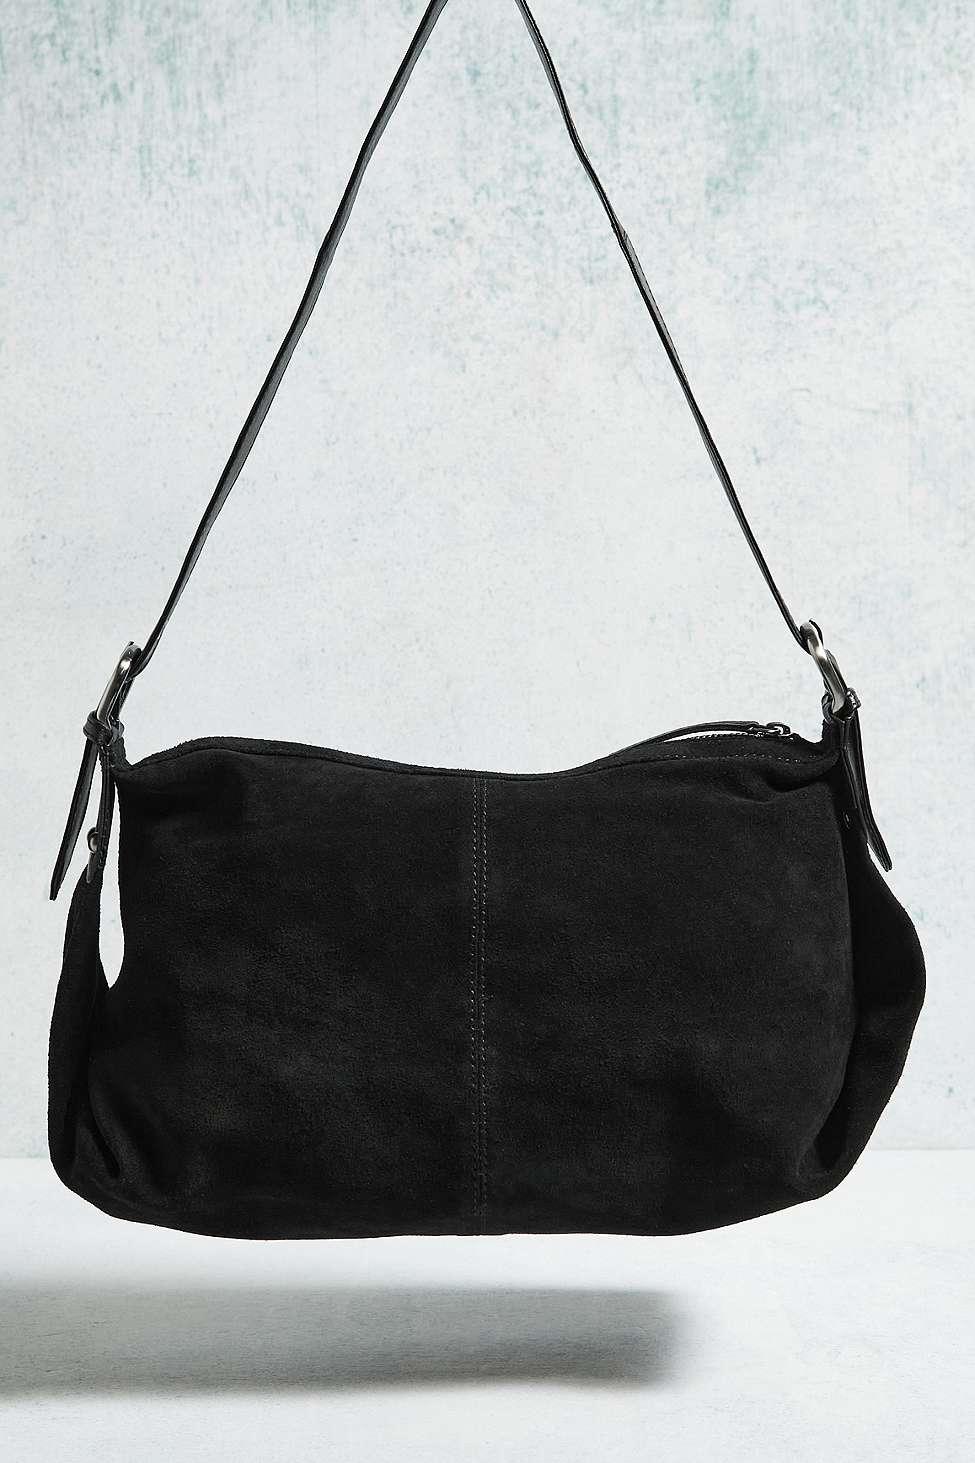 Urban Outfitters Uo Suede Patchwork Shoulder Bag in Black